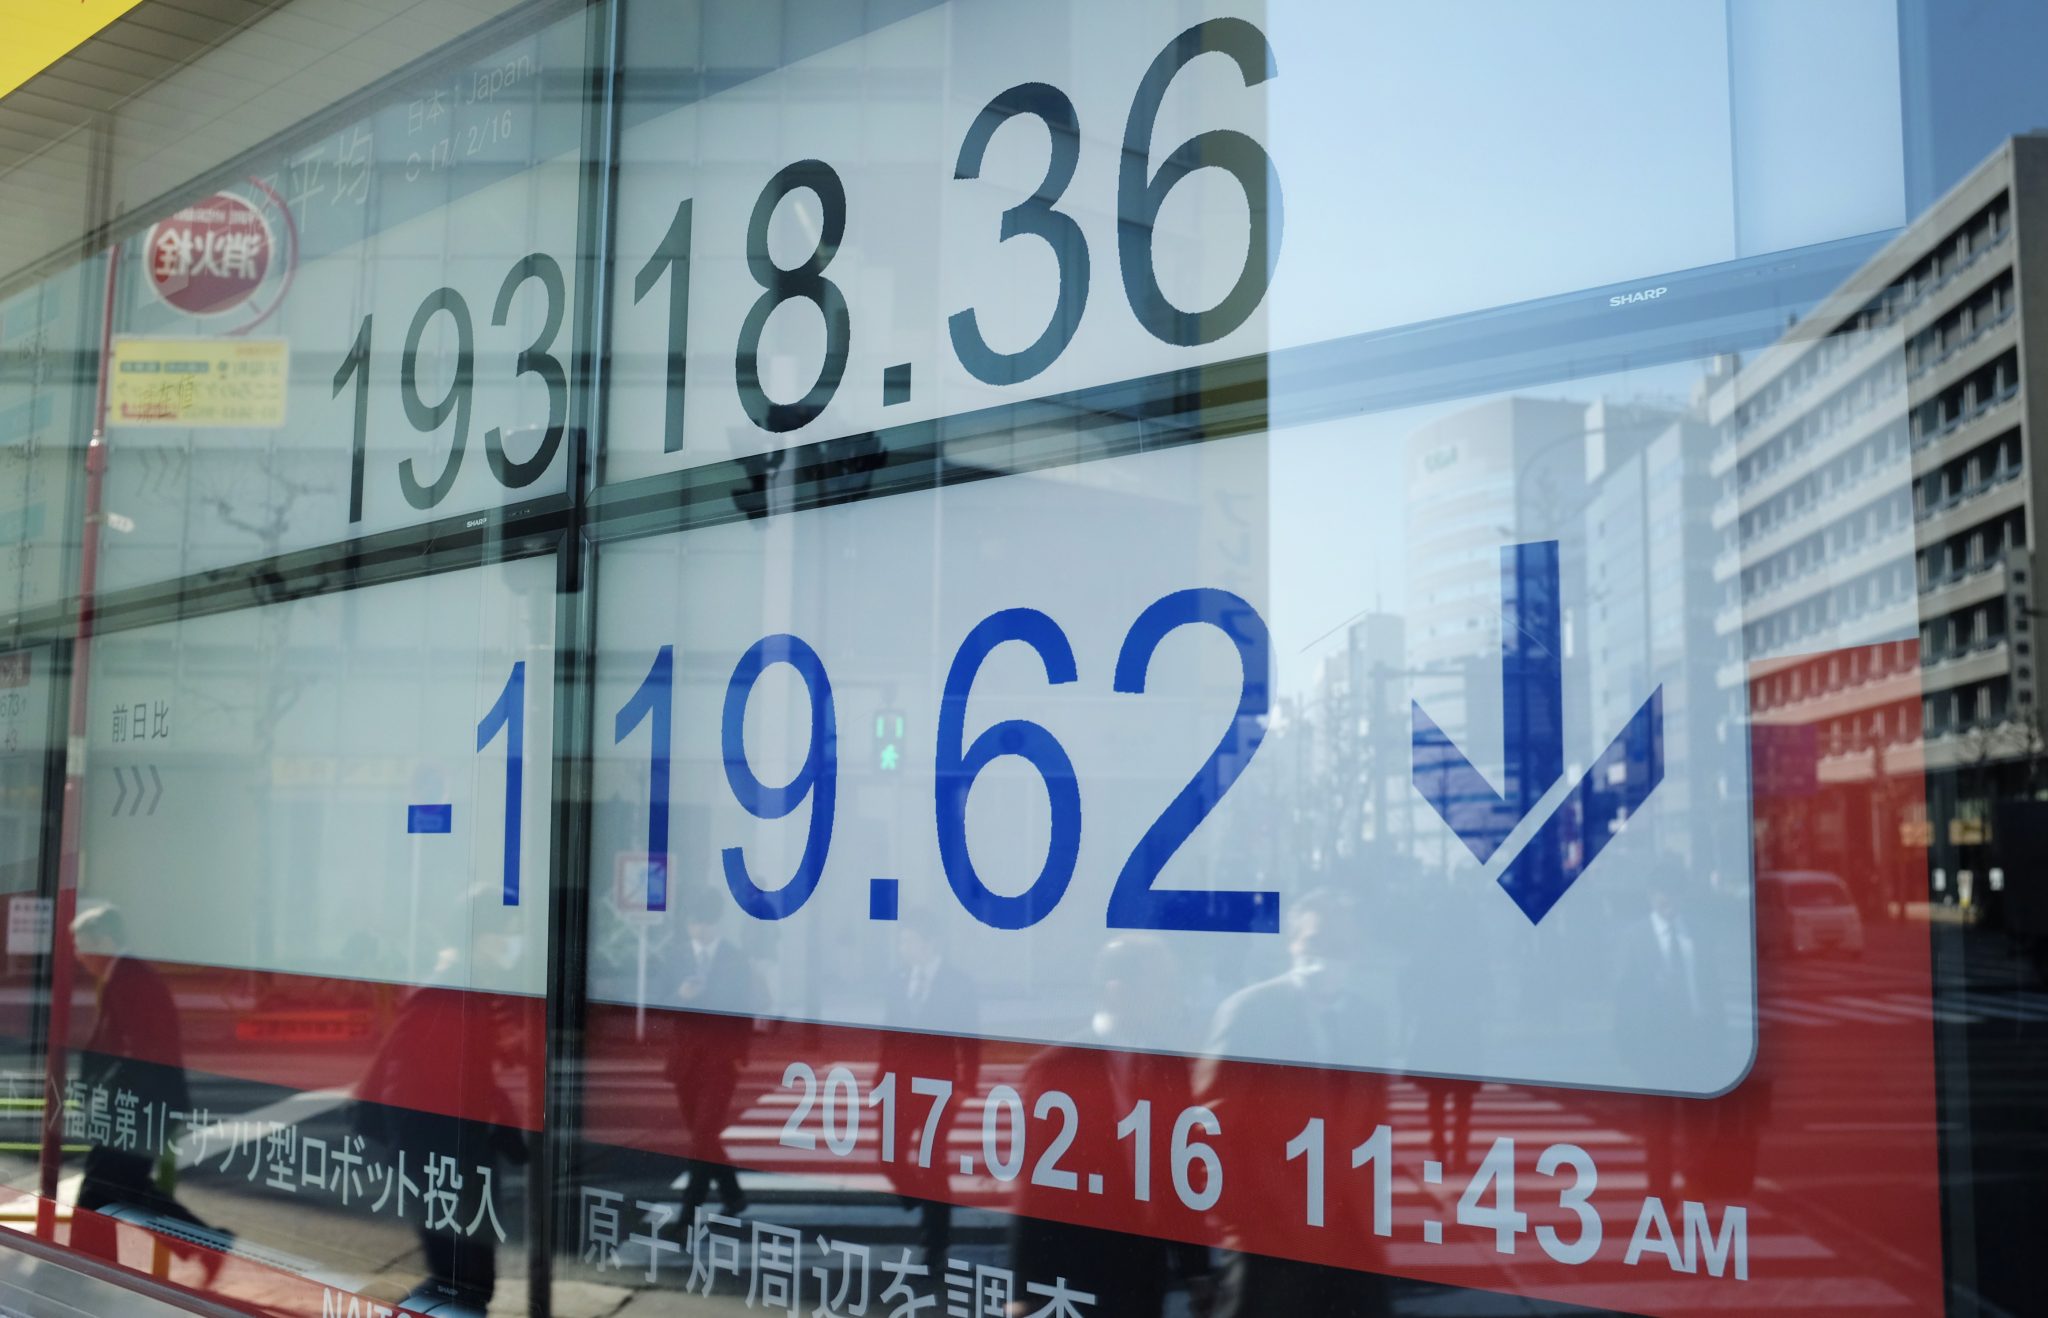 An electric quotation board flashing the Nikkei key index of the Tokyo Stock Exchange is displayed at a securities company in Tokyo on February 16, 2017.   The Toshiba Corporation logo is seen at the company's headquarters in Tokyo on February 16, 2017. Shares in Toshiba fell 1.95 percent to 205.6 yen after losing 16 percent the previous two days as fears mount over massive losses from its US nuclear power business. / AFP PHOTO / KAZUHIRO NOGI